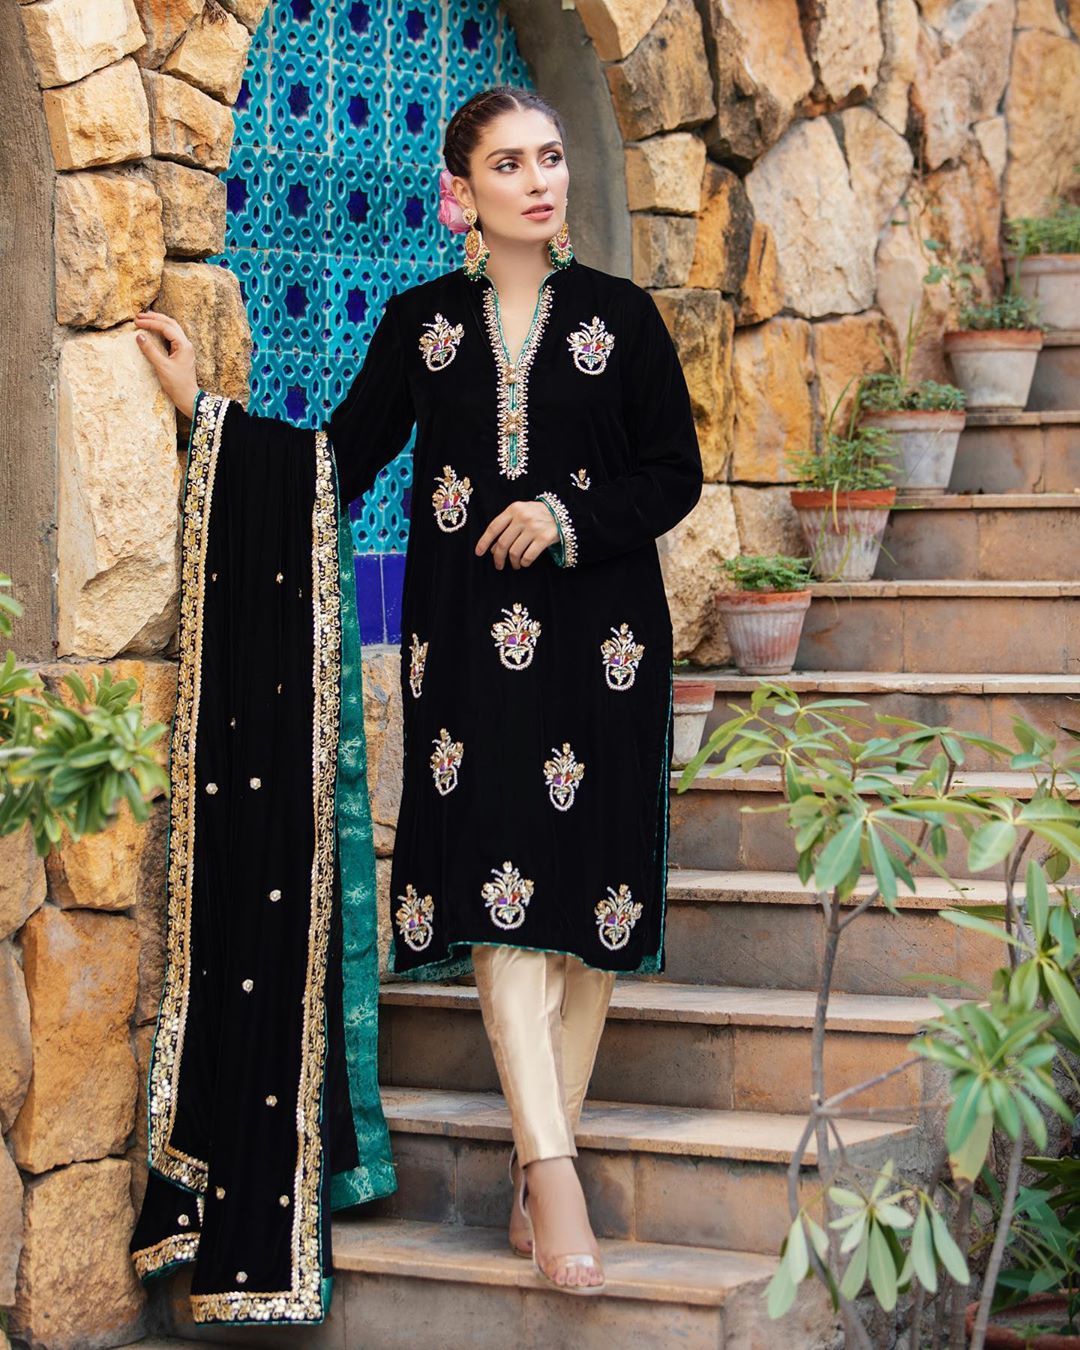 Ayeza Khan is Looking Gorgeous in this Black and Green Dresses by RJ’s Pret